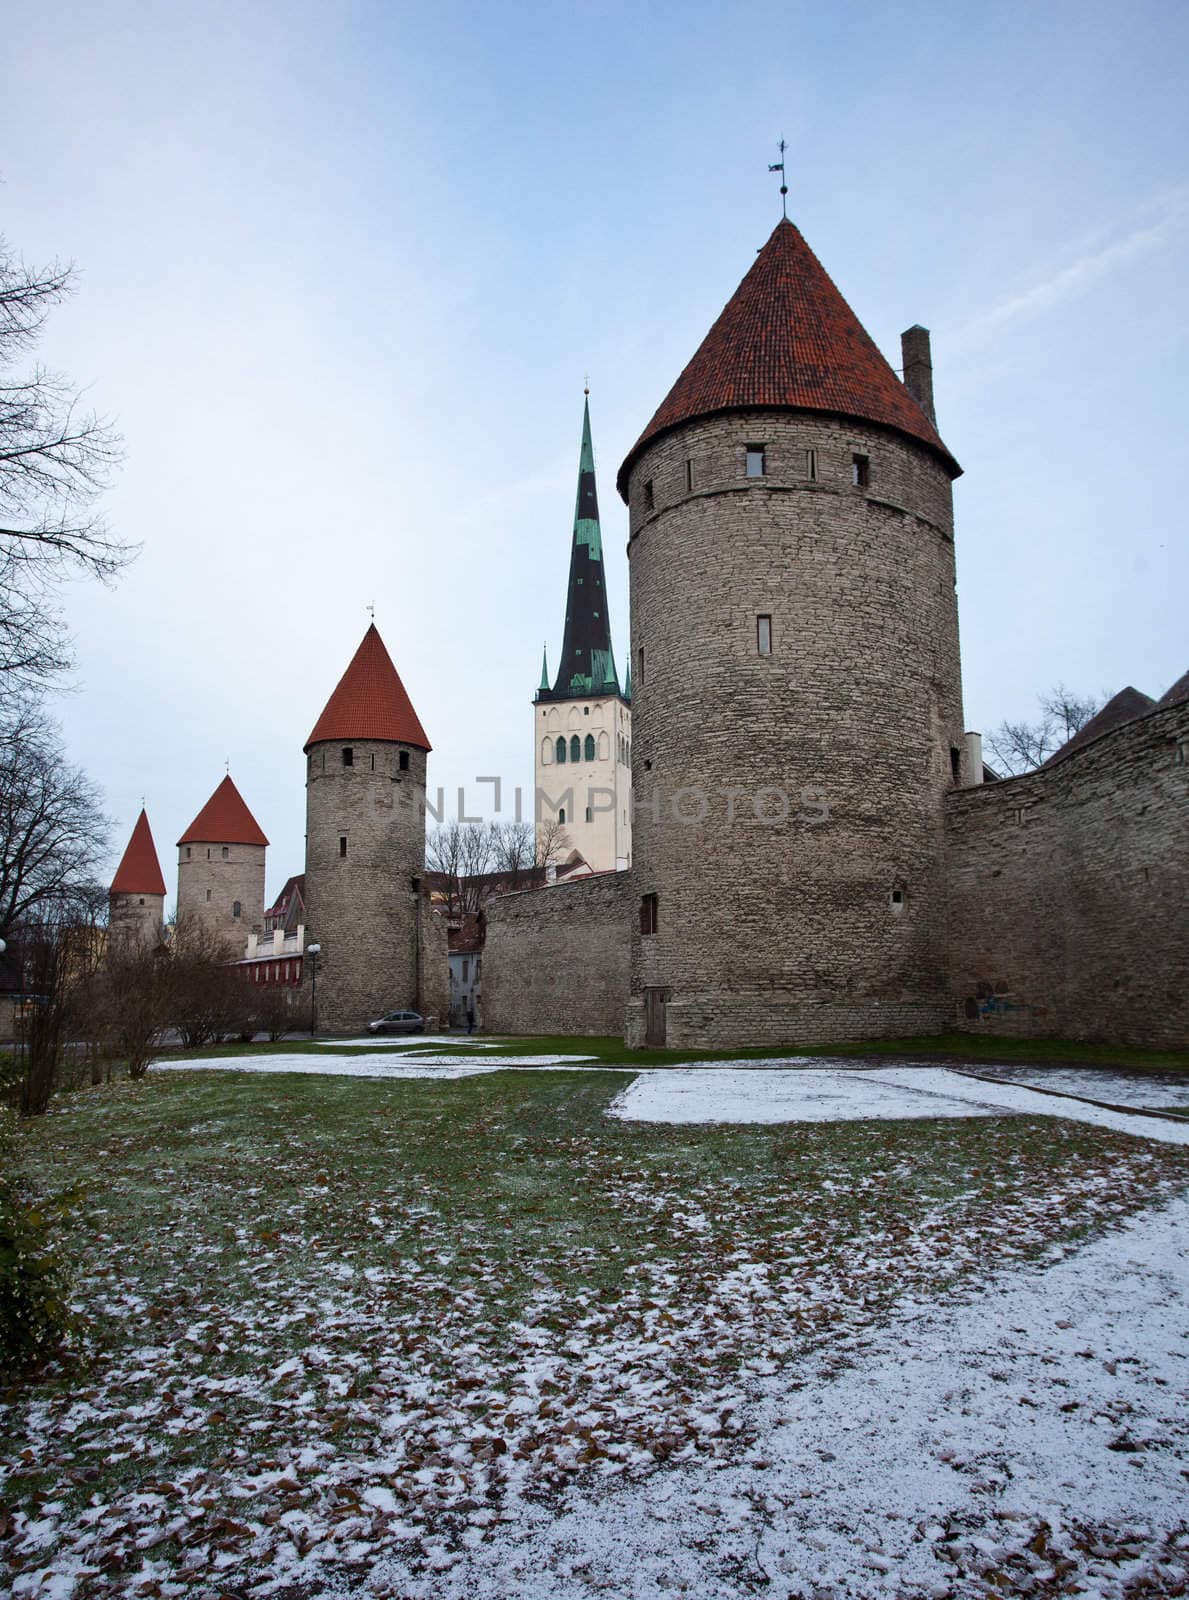 Ancient stone walls of Tallinn with four towers in alignment